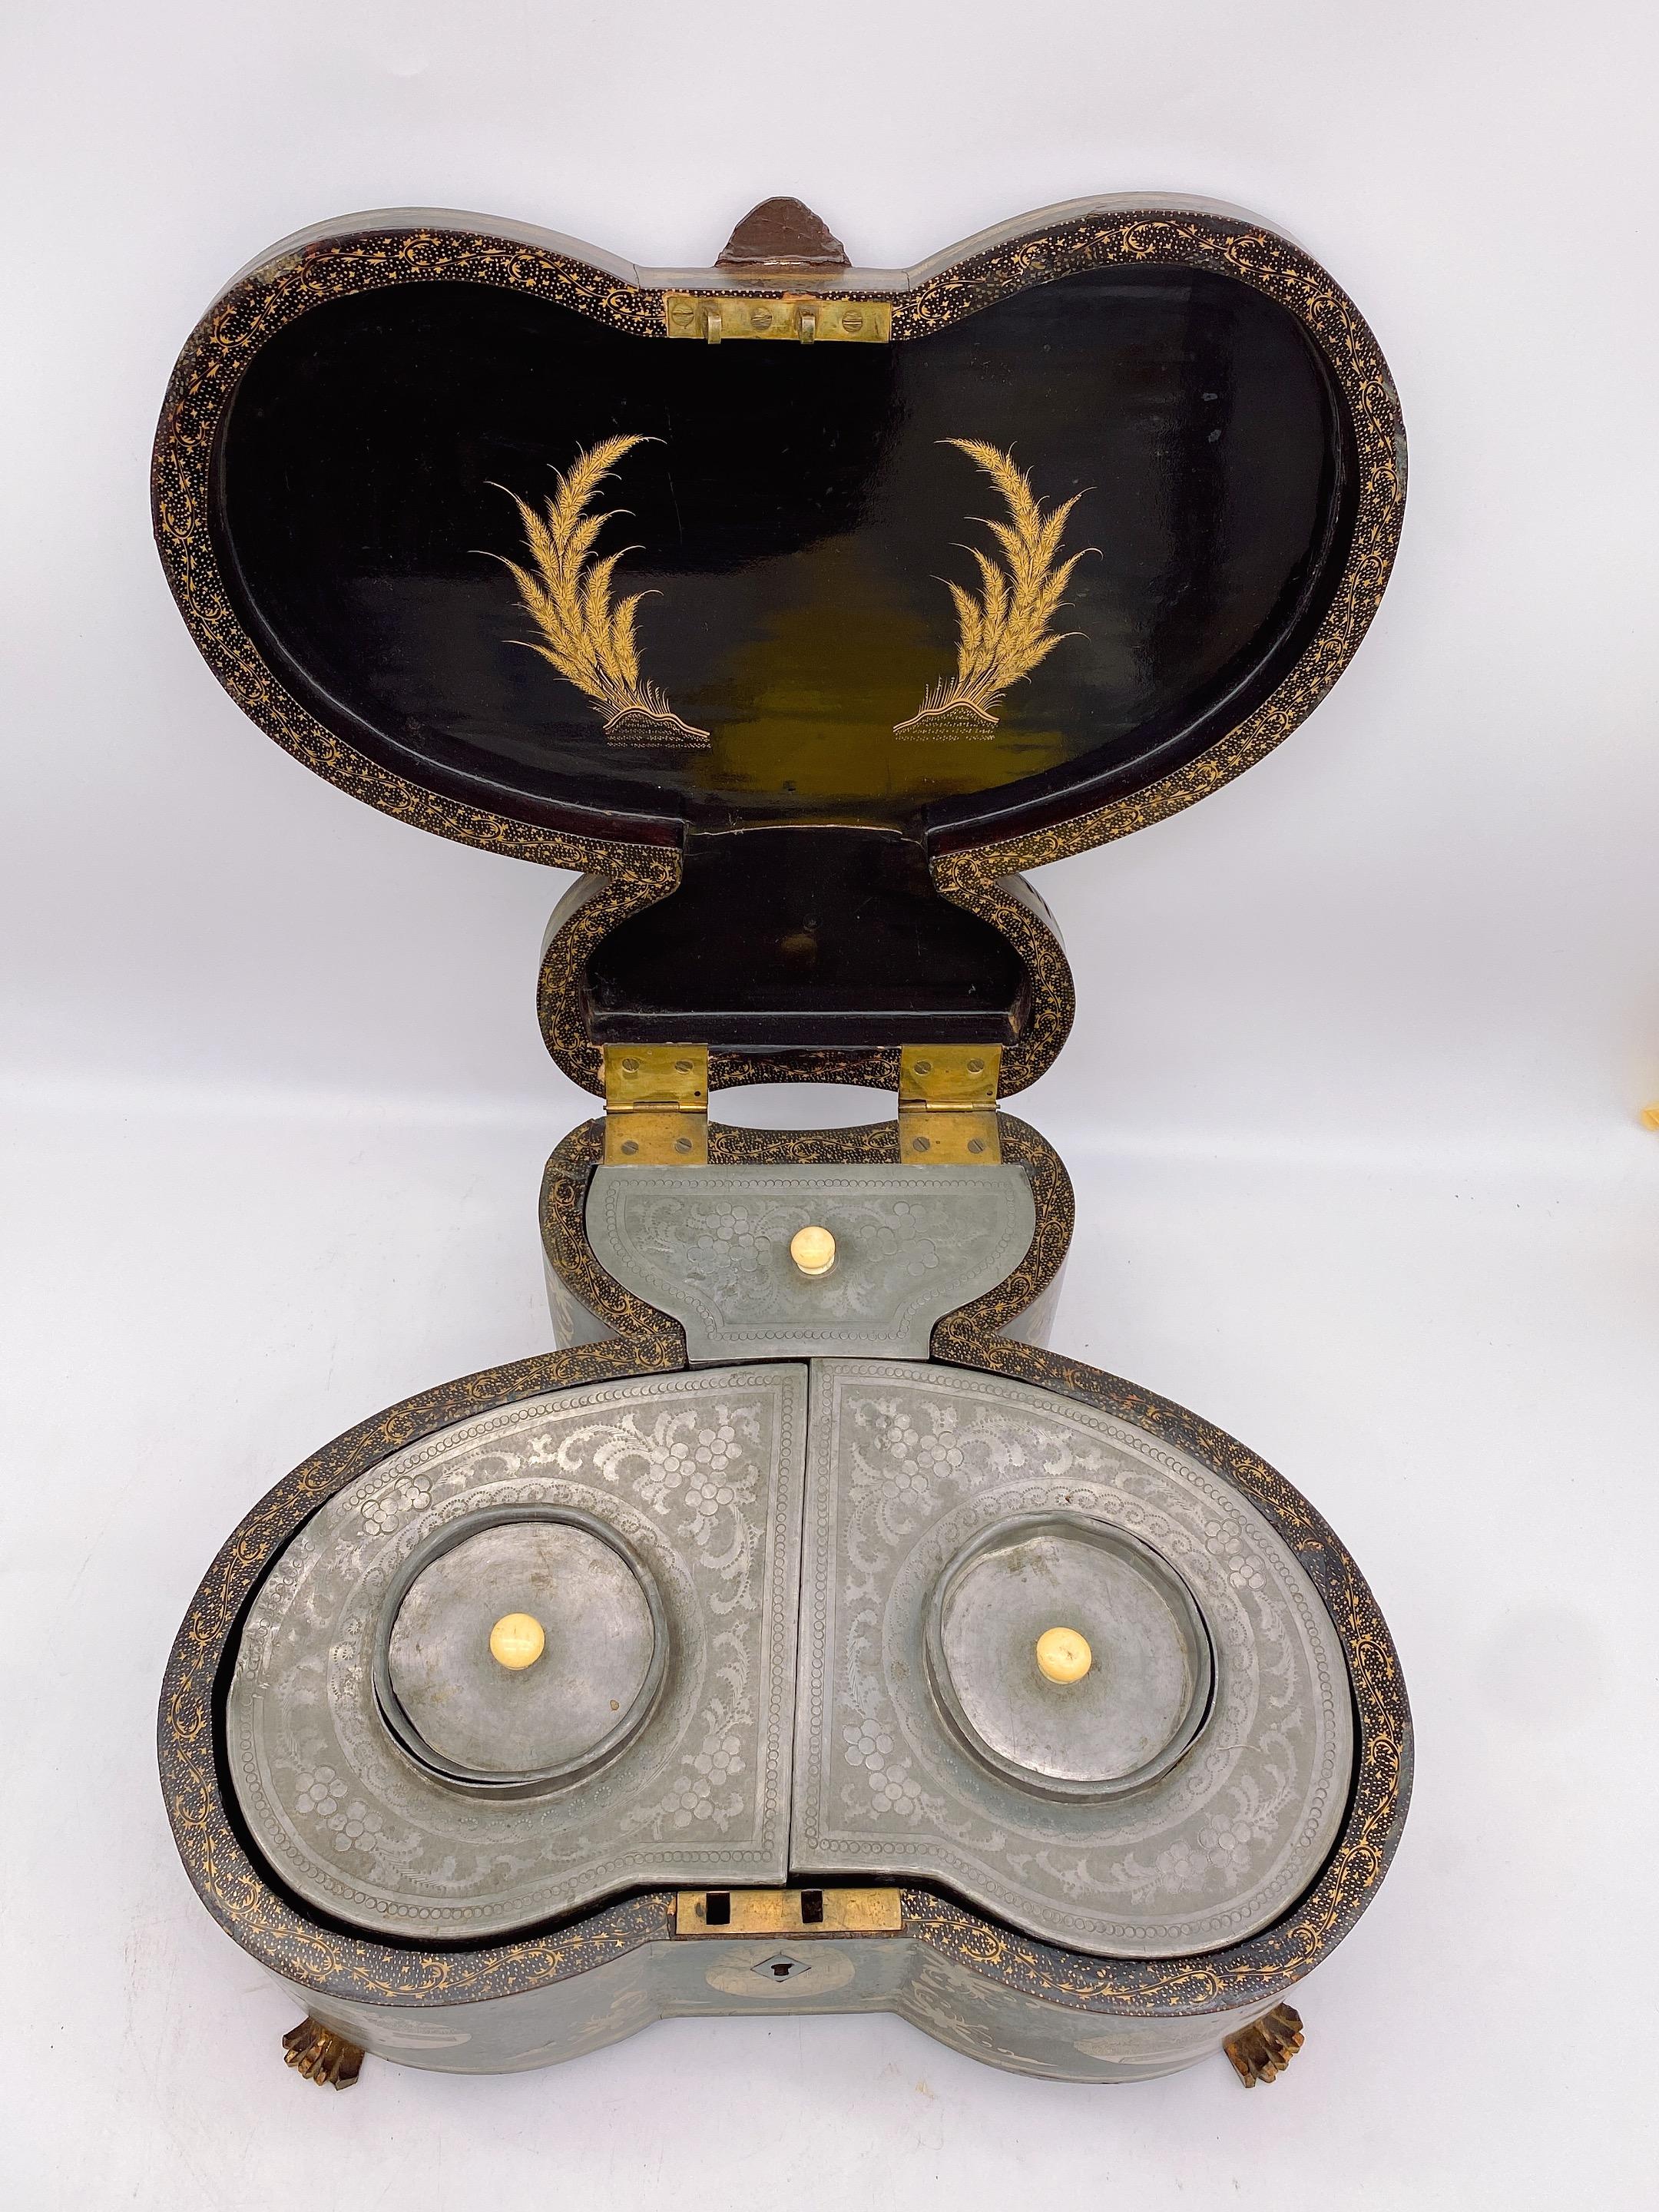 Rare 19th Century Antique Chinese Gilt Lacquer Butterfly Cased Pewter Tea Caddy For Sale 13